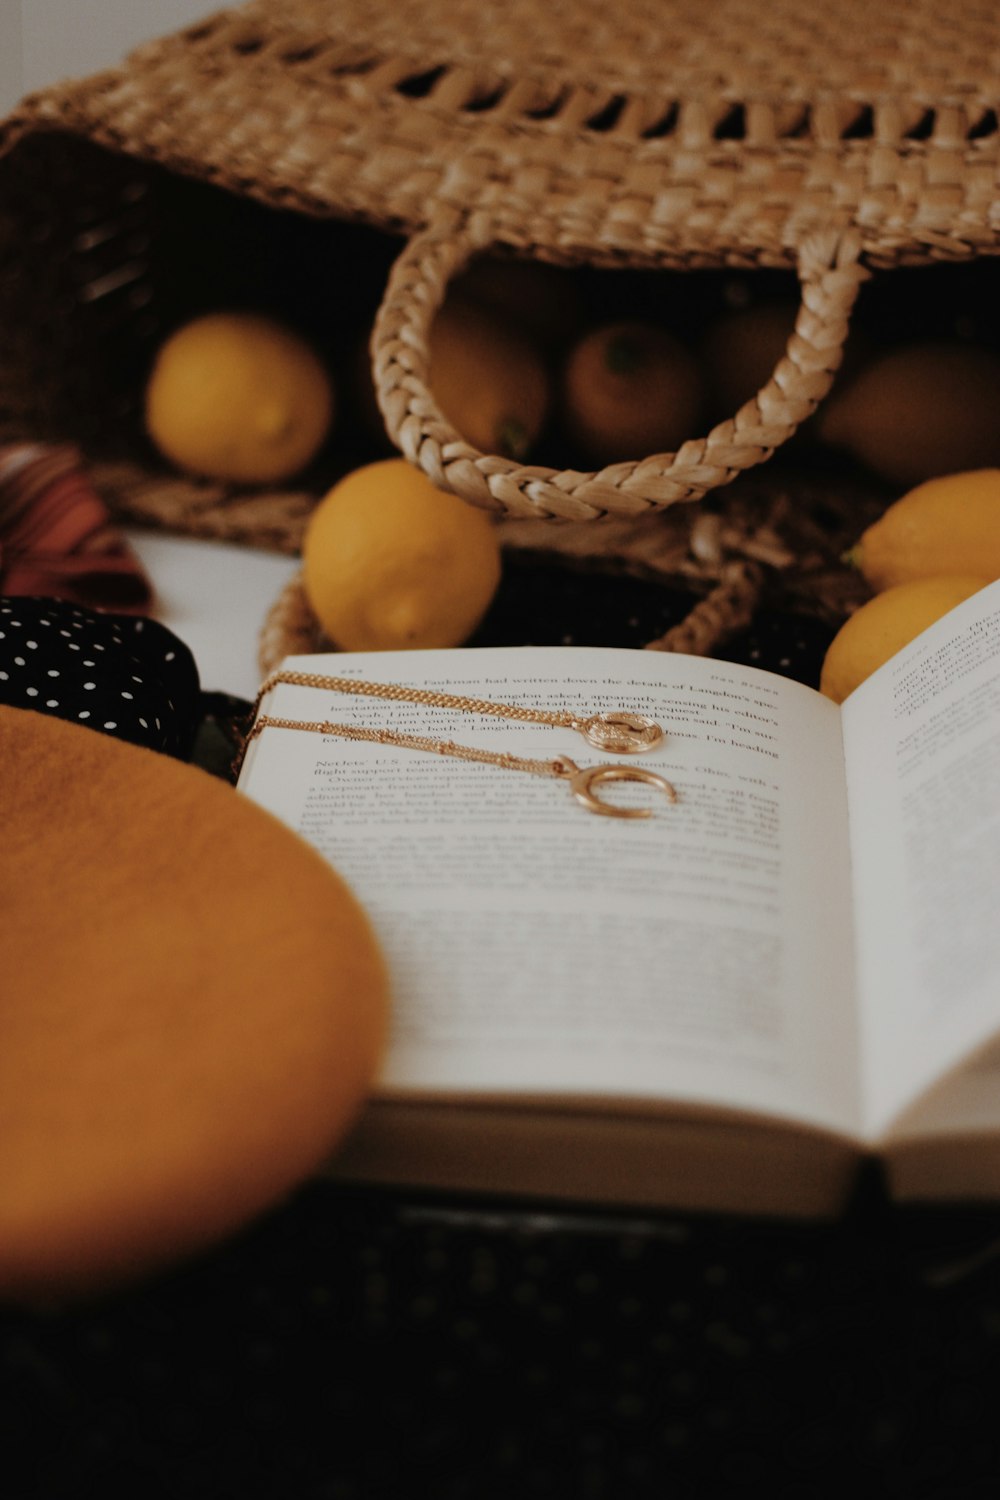 two gold-colored necklaces on opened book beside lemon in basket